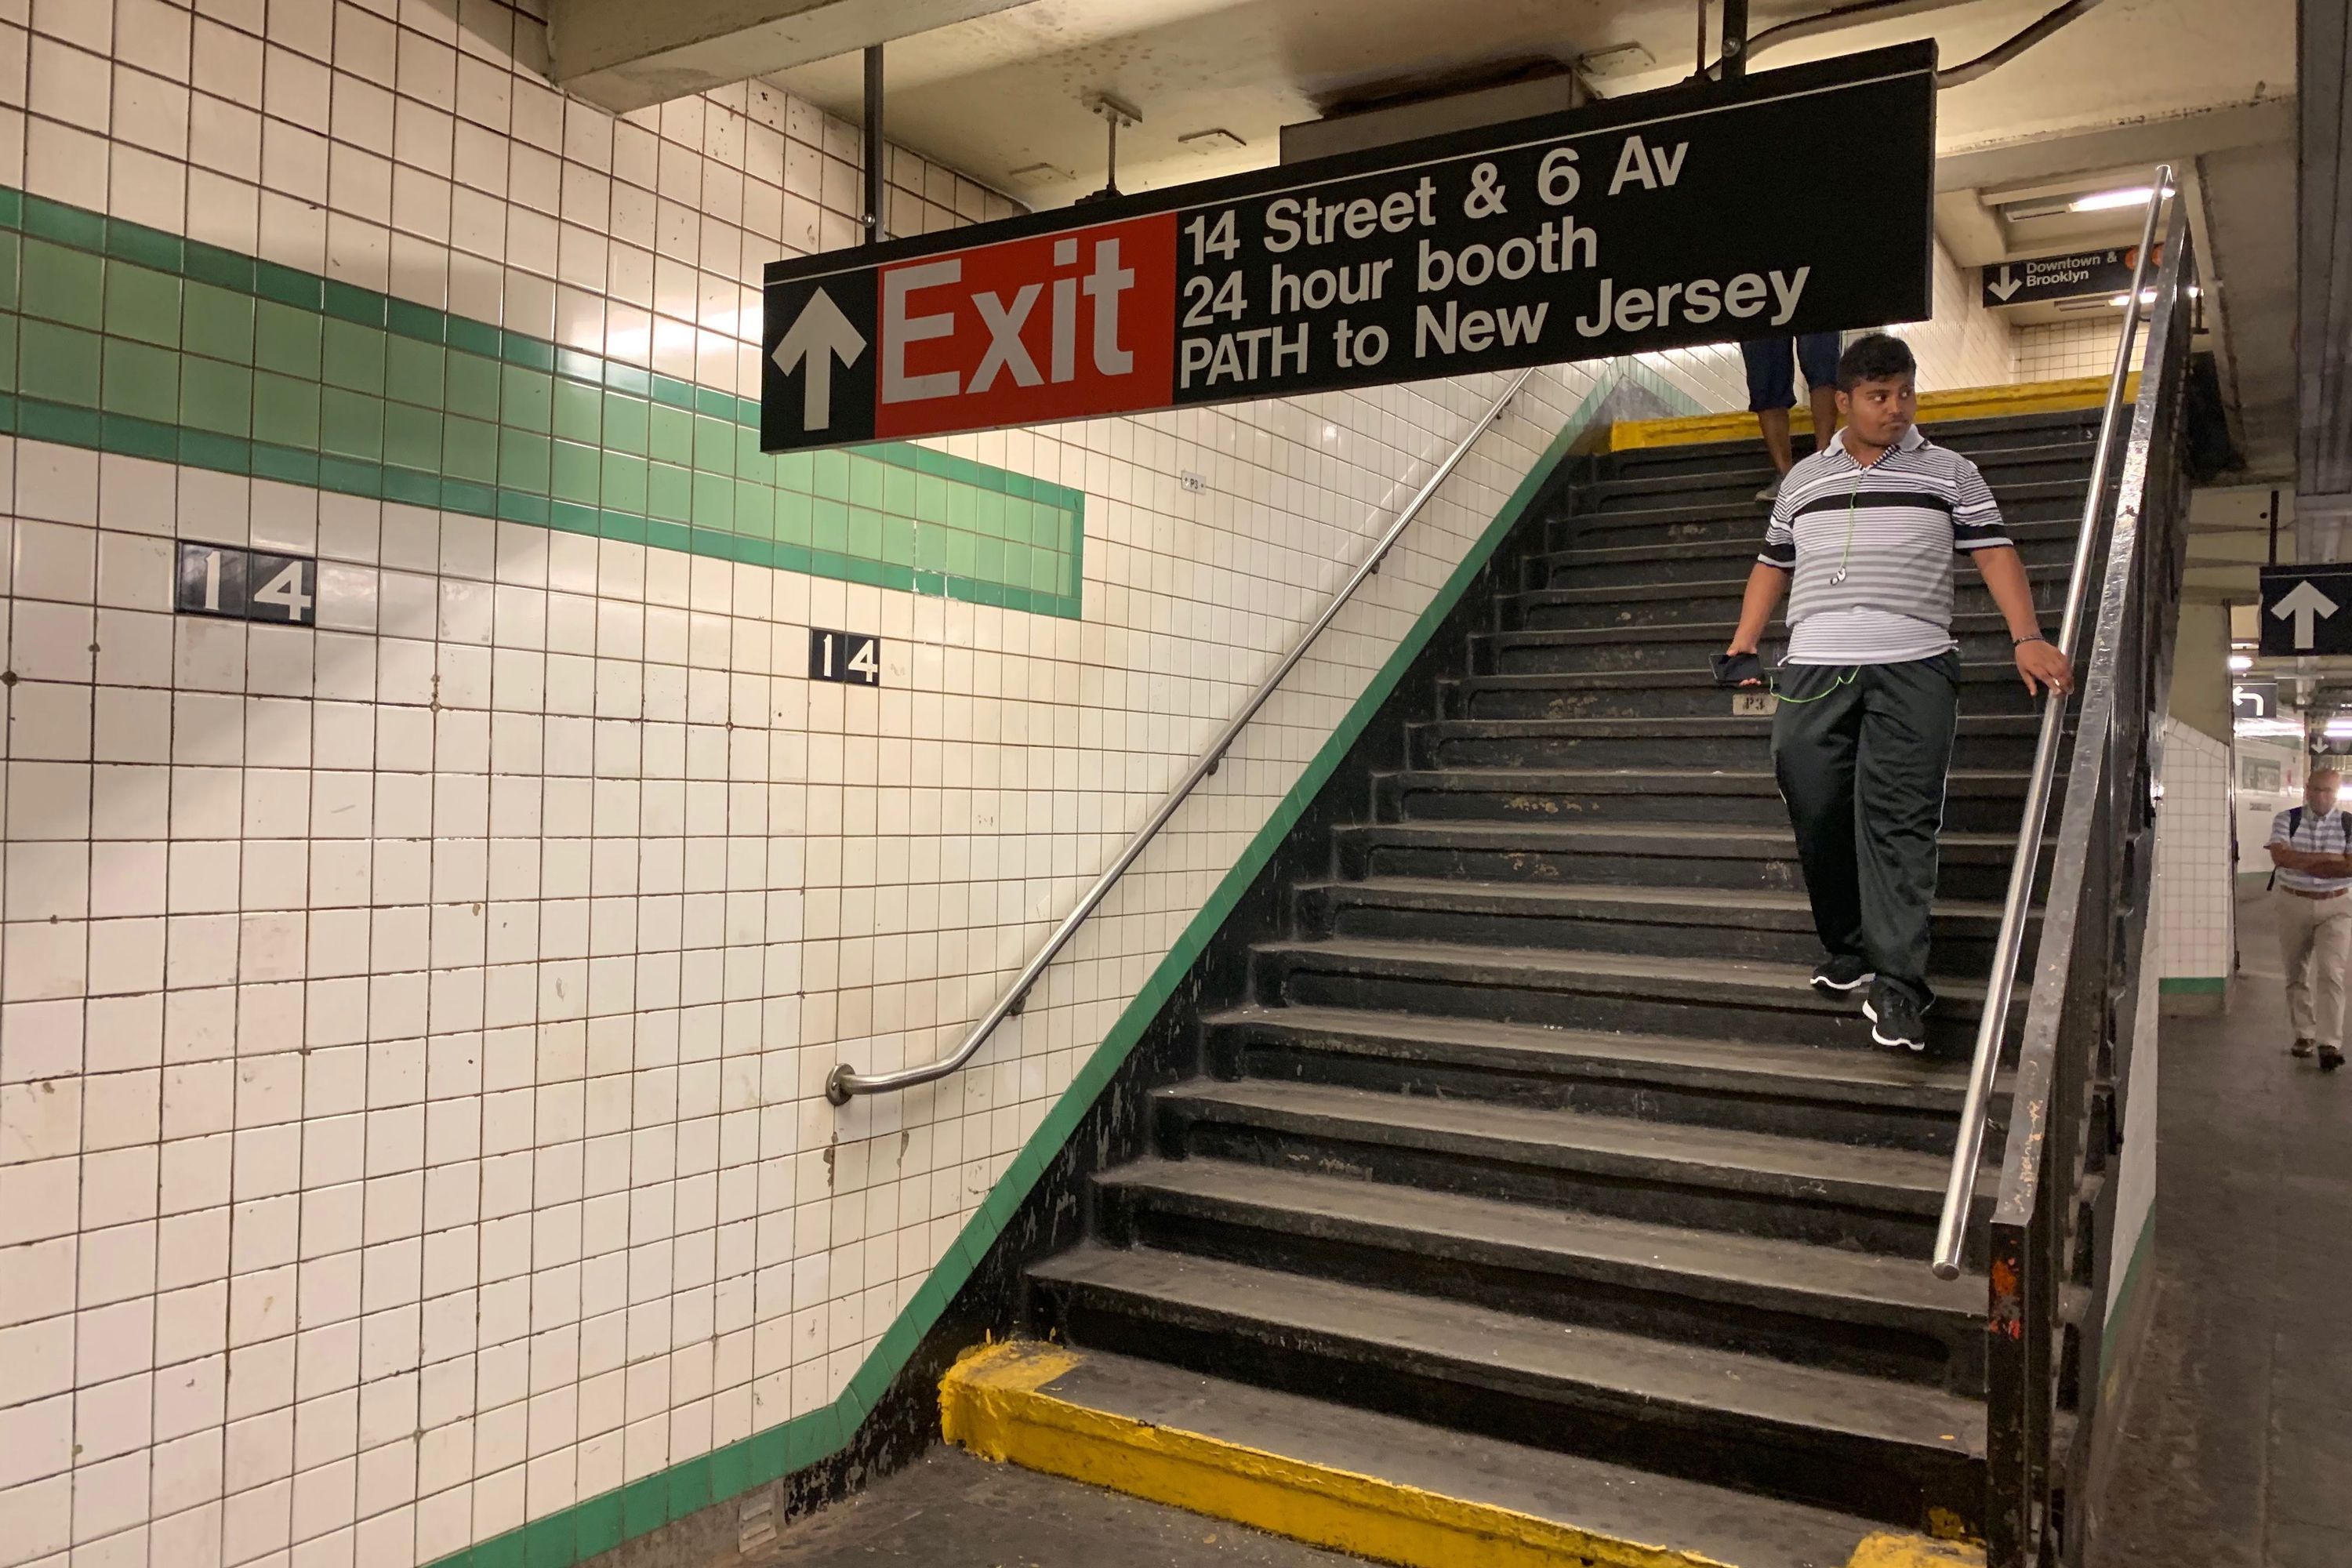 14th Street and Sixth Avenue station will eventually become ADA accessible.